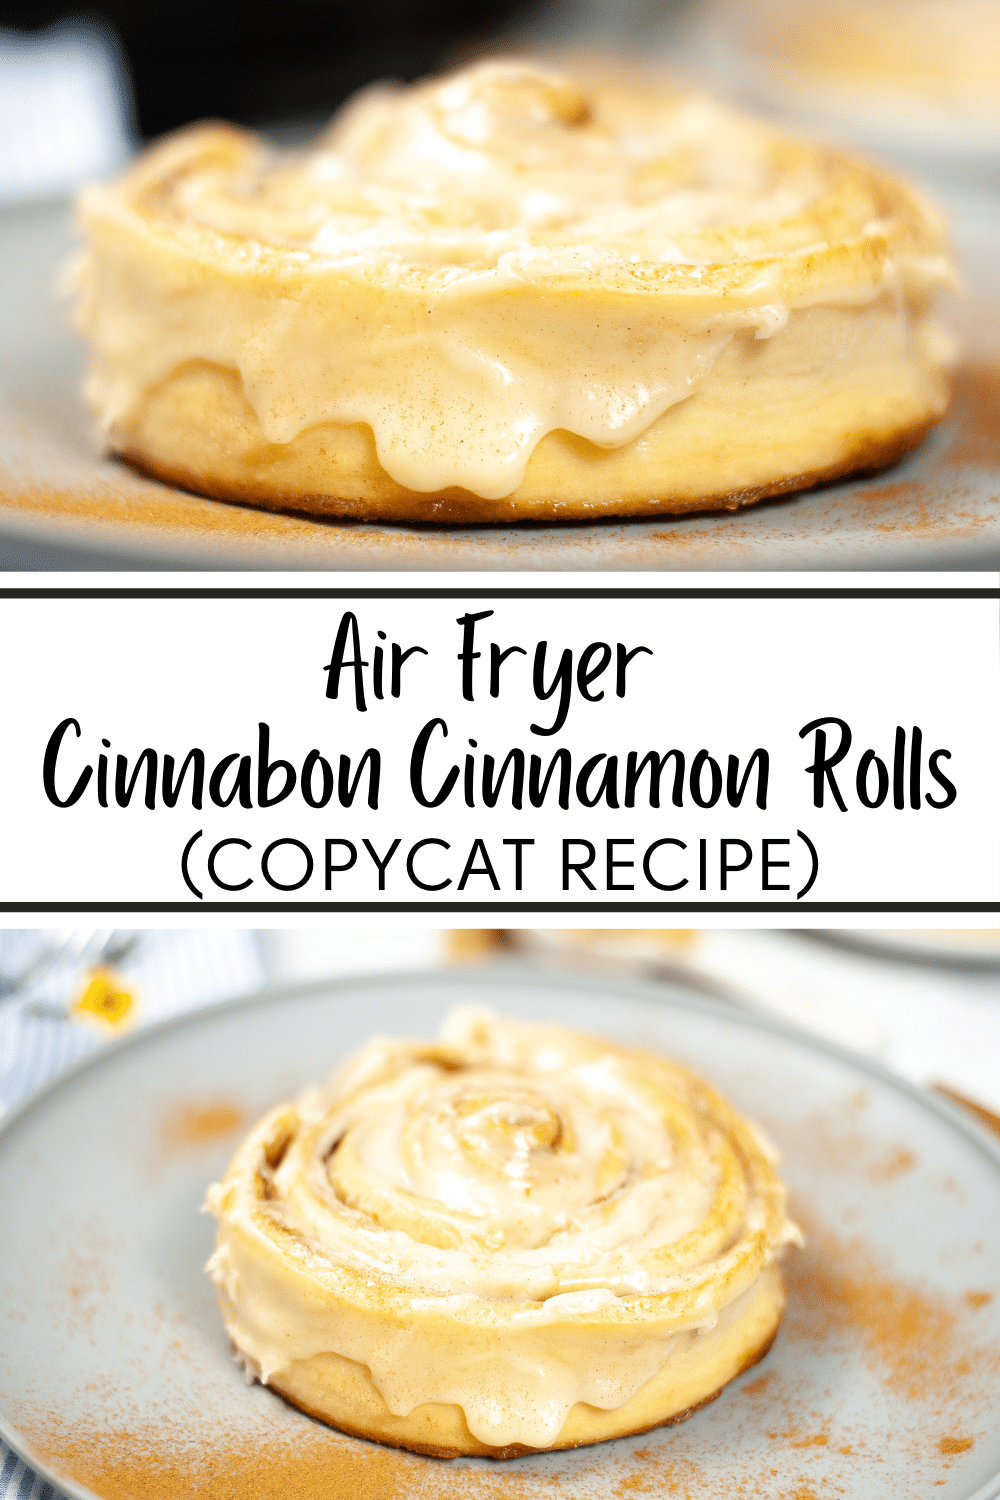 Air Fryer Cinnamon Rolls are easy to make and taste just like the real thing! If you're looking for a delicious breakfast recipe, try these! #airfryercinnamonrolls #airfryer #cinnamonrolls #cinnaboncopycatrecipe via @wondermomwannab